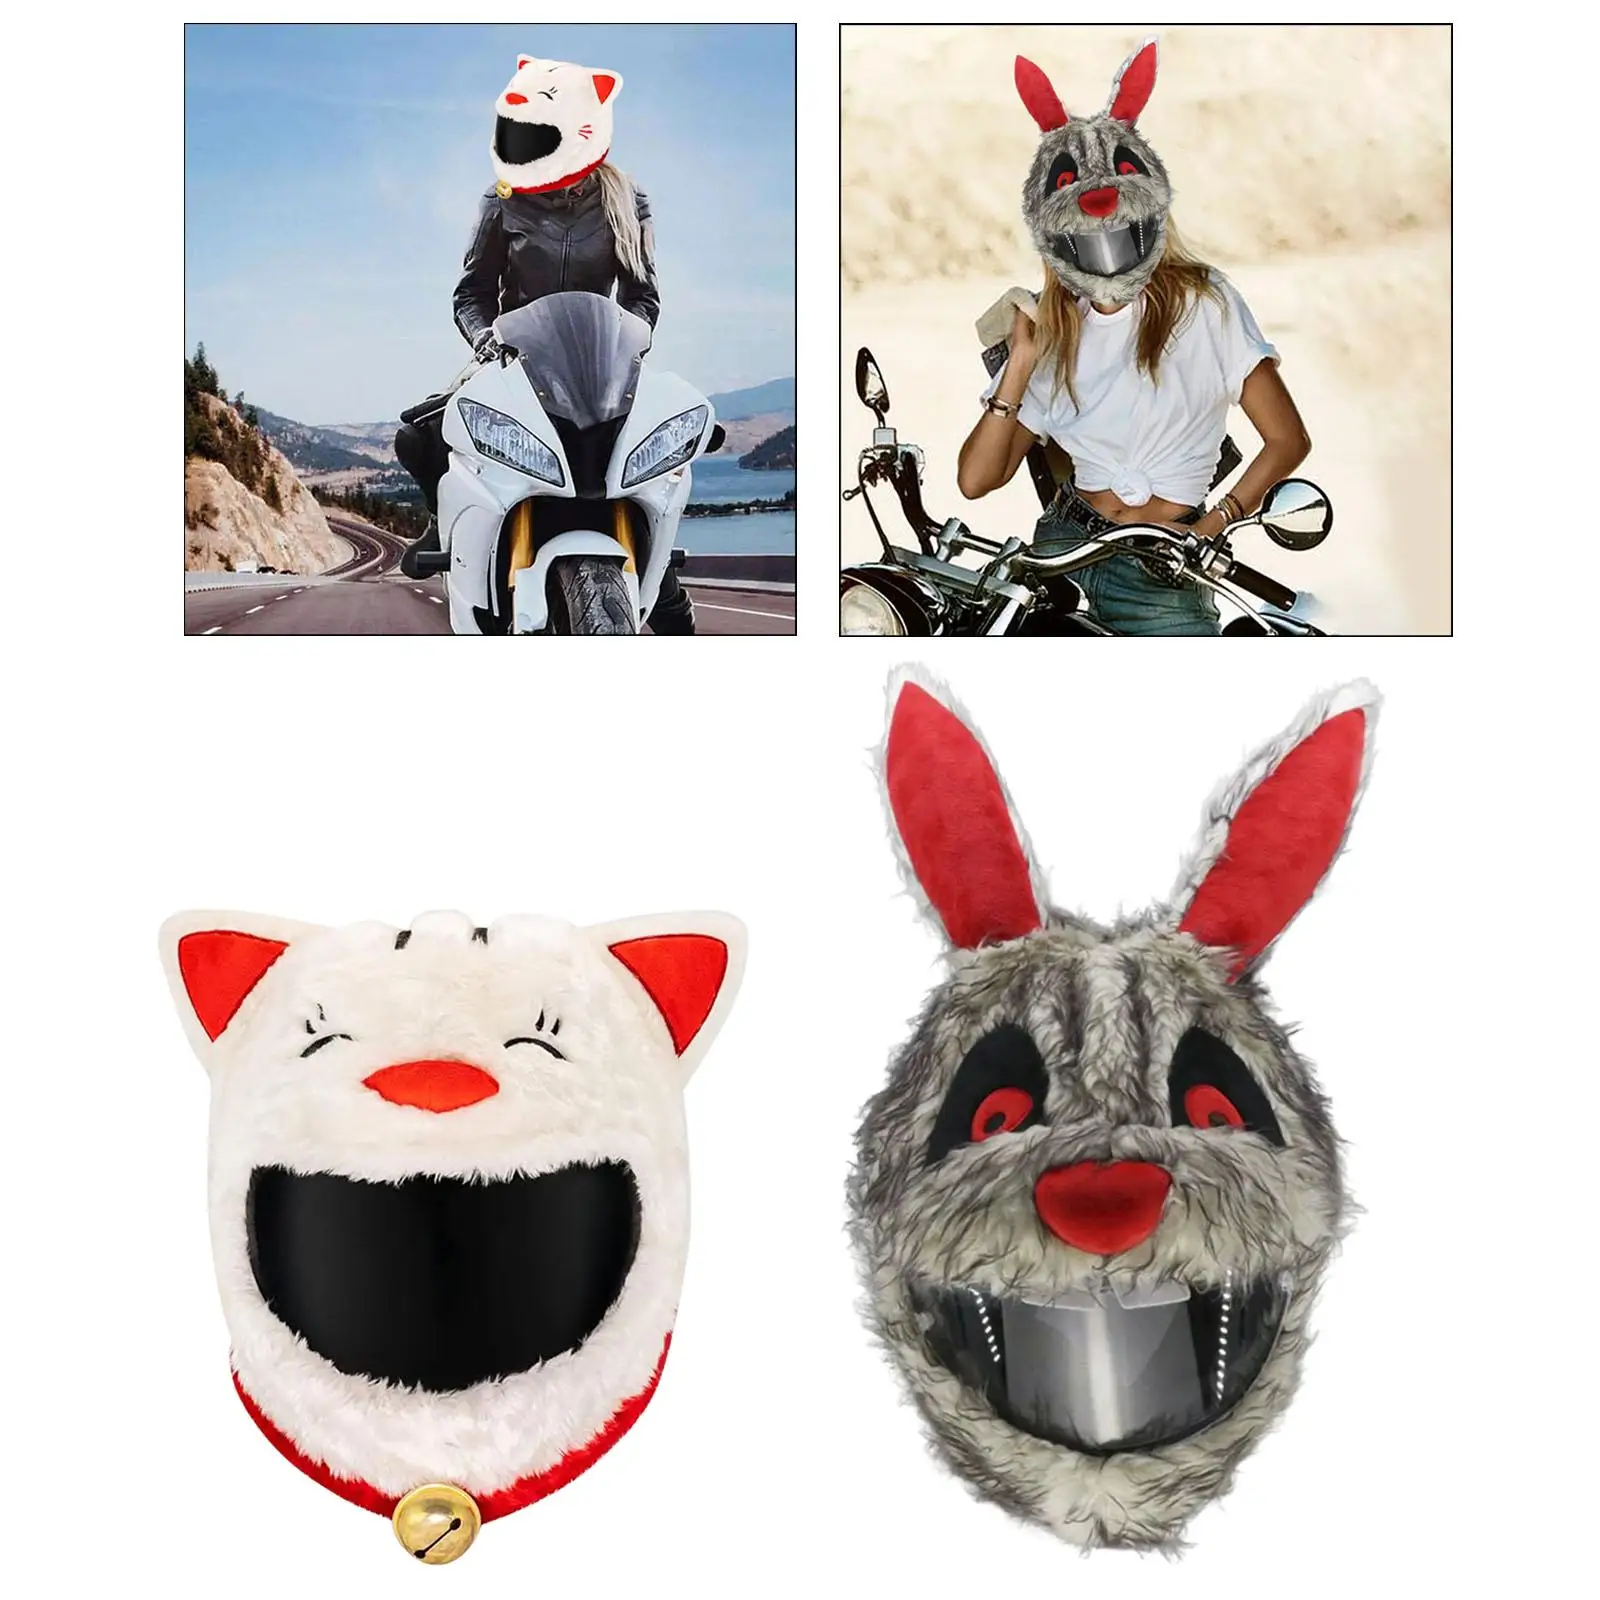 Christmas Motorcycle Helmets Cover Women Men Skiing Accessories Dust Cap Full Face Christmas Hat Fun Rides Gifts Decoration